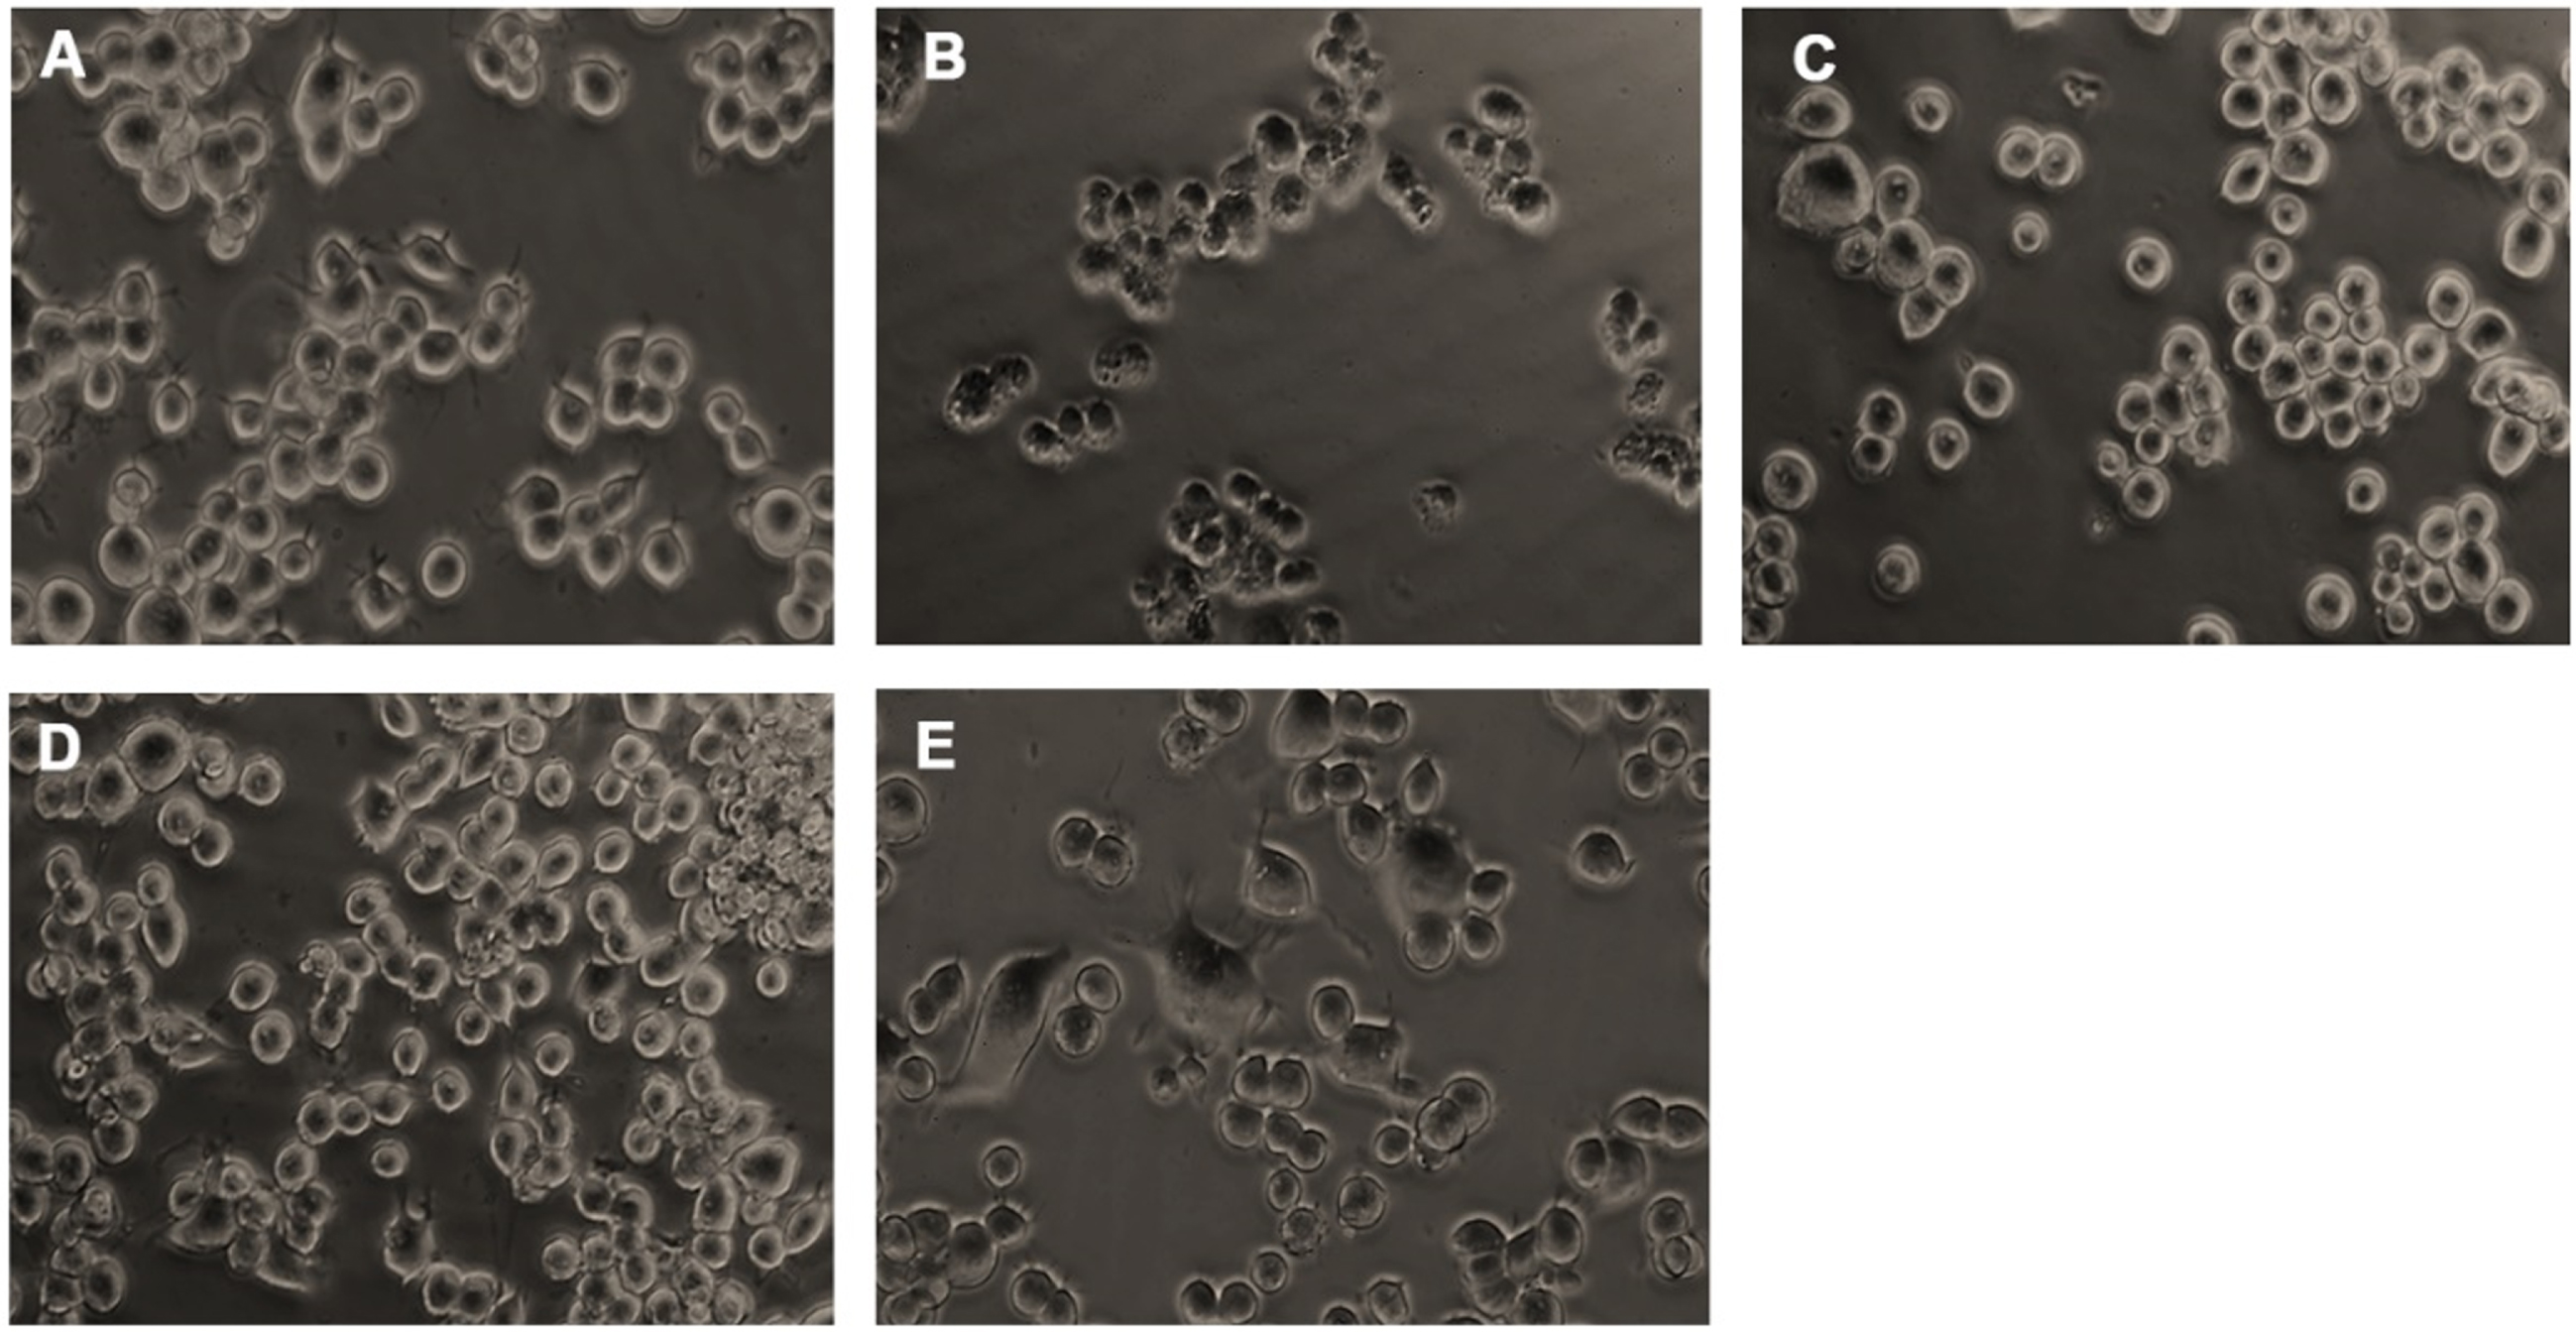 Microscopic images representing restoration from glucose-induced toxicity by HS. (A) Control (B) High glucose (175 mM) (C) HS-7.5 (pre-treatment 2 h) + high glucose (D) HS-10 (pre-treatment 2 h) + high glucose (E) HS-10